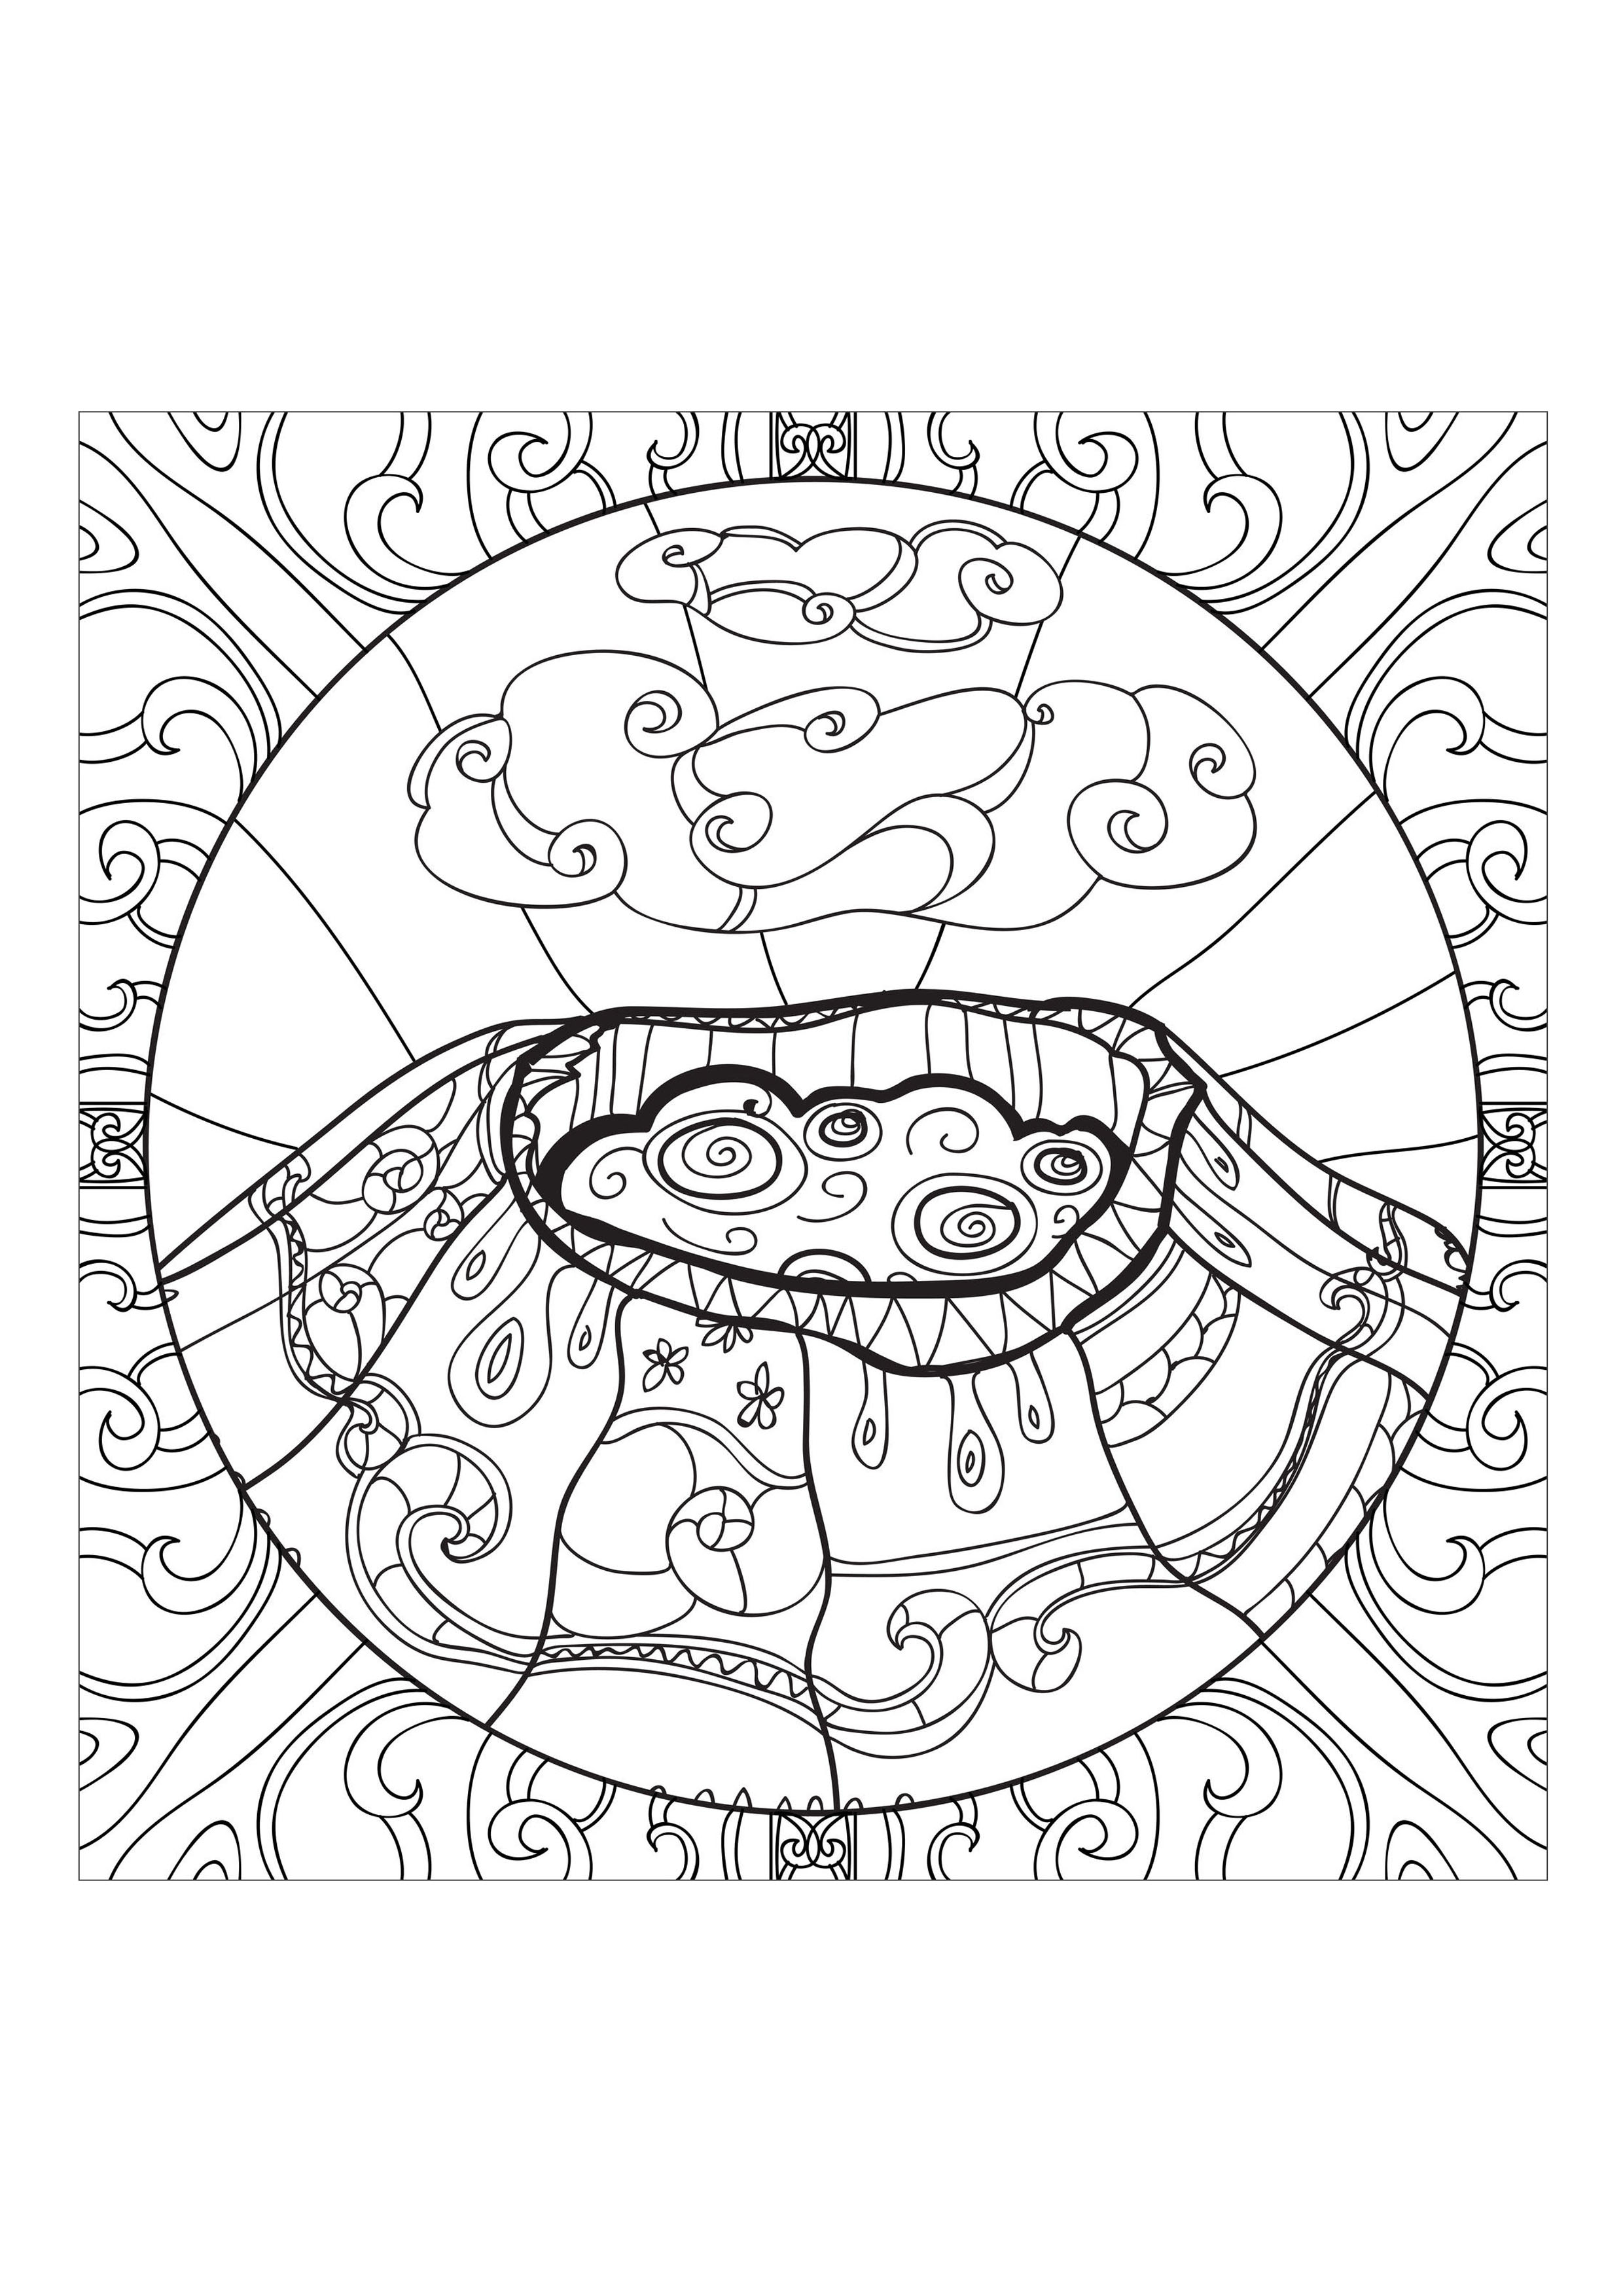 Download Volcano - Coloring Pages for Adults